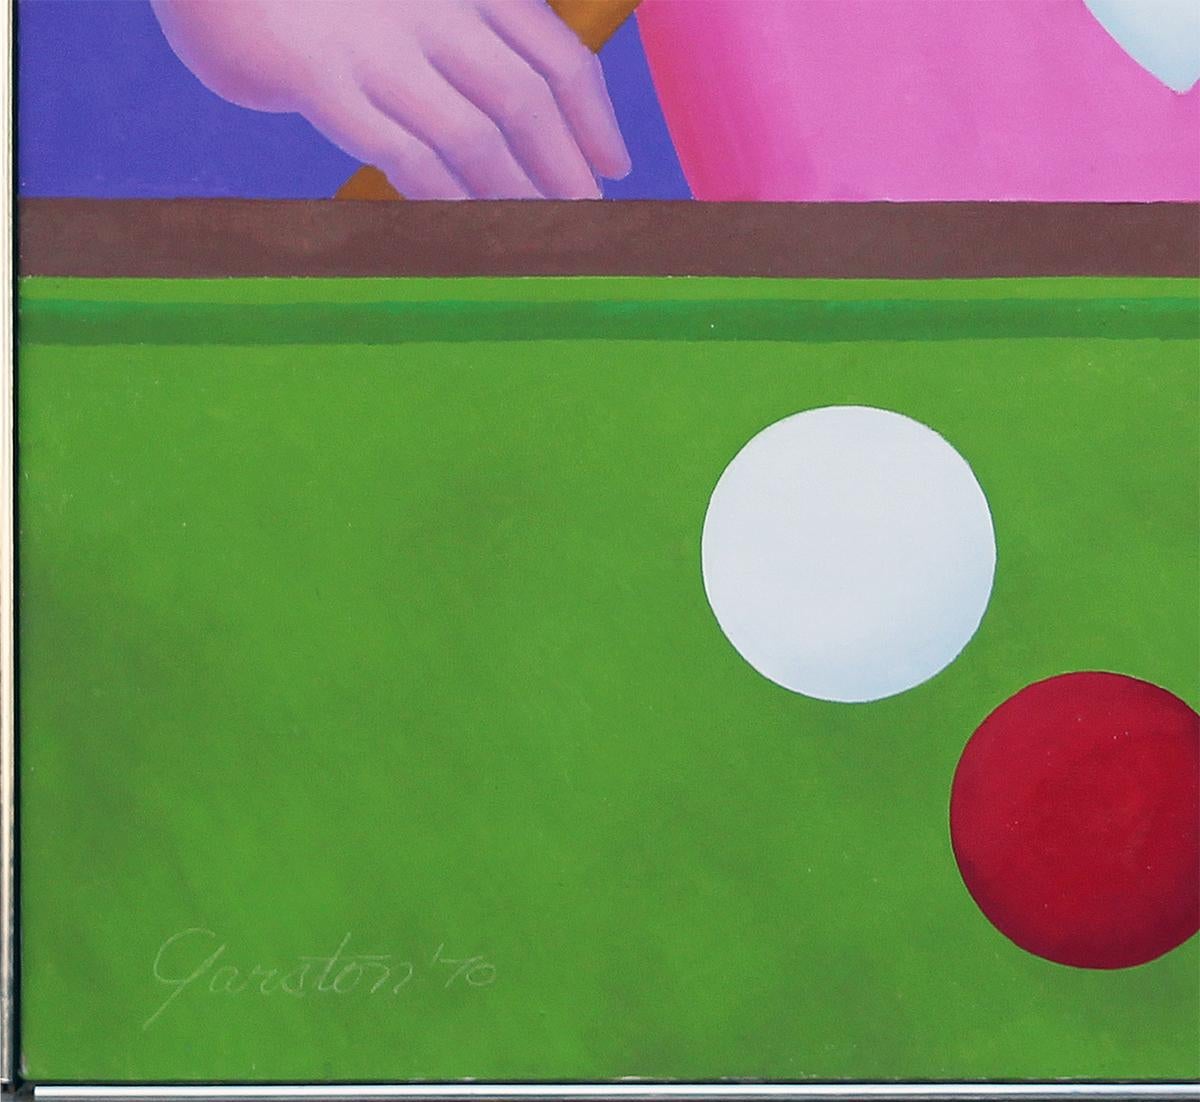 Colorful Purple, Pink, & Green Modern Portrait of Man Playing Billiards or Pool - Gray Figurative Painting by Gerald Garston